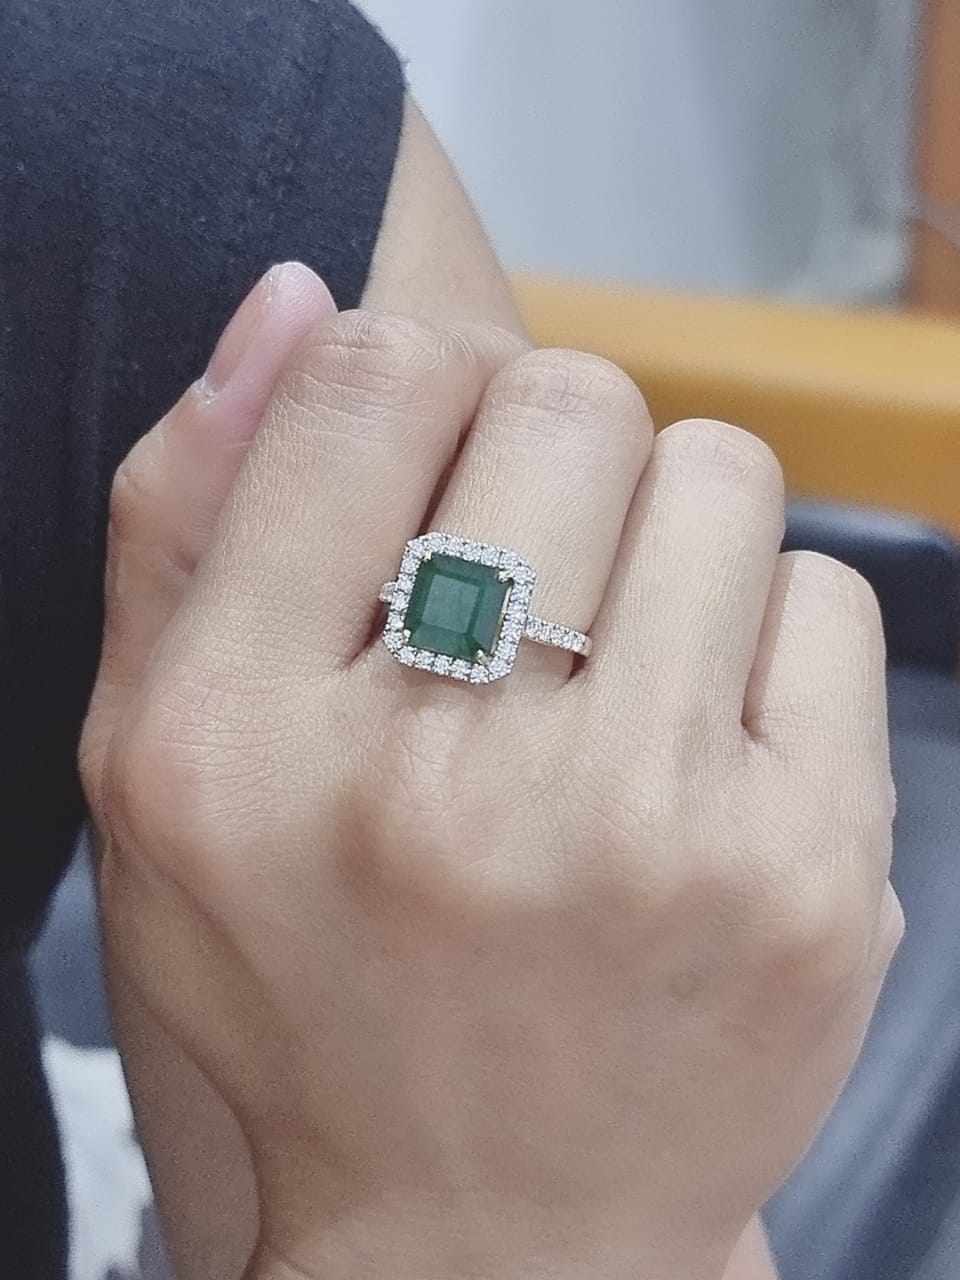 Halo Emerald And Diamond Ring In 18k Yellow Gold